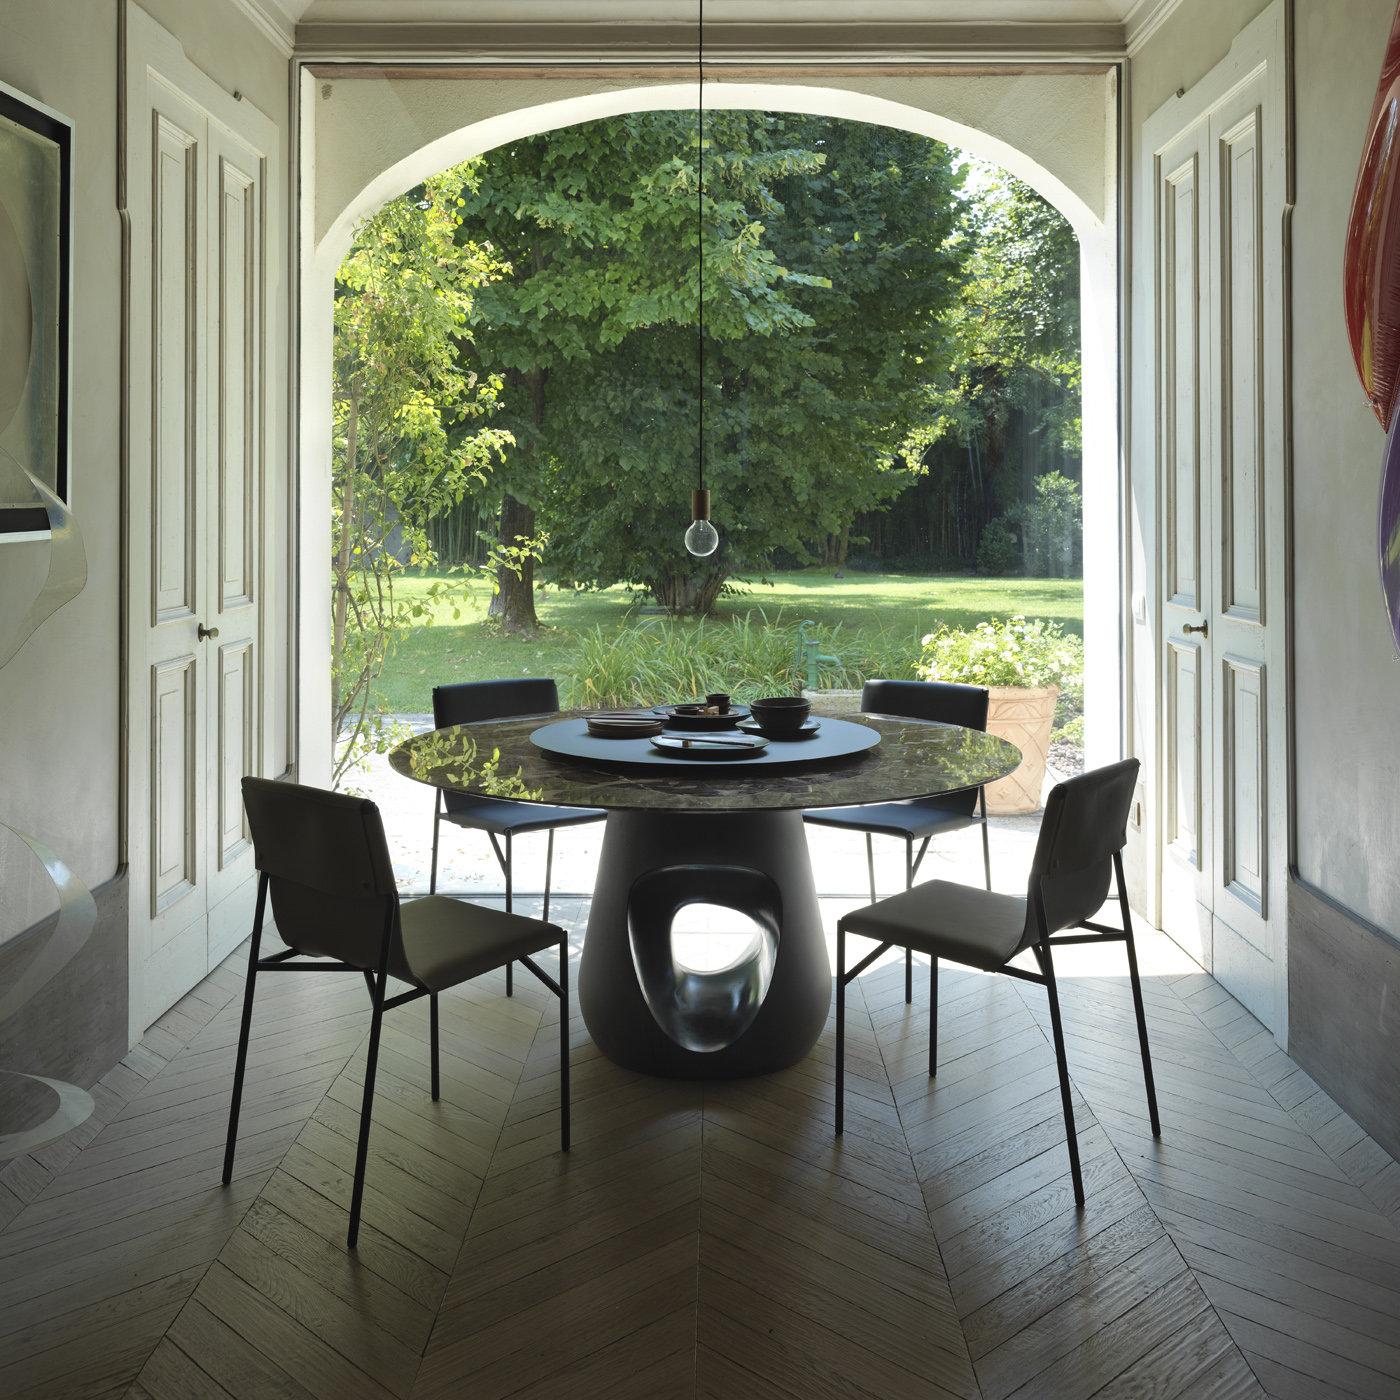 An oval or round top crafted of Emperador dark marble boasting its natural shapes and captivating hues is distinguishing element of this dining table designed by Roberto Zamberlan. A tribute to English sculptor Jocelyn Barbara Hepworth (1903-1975)